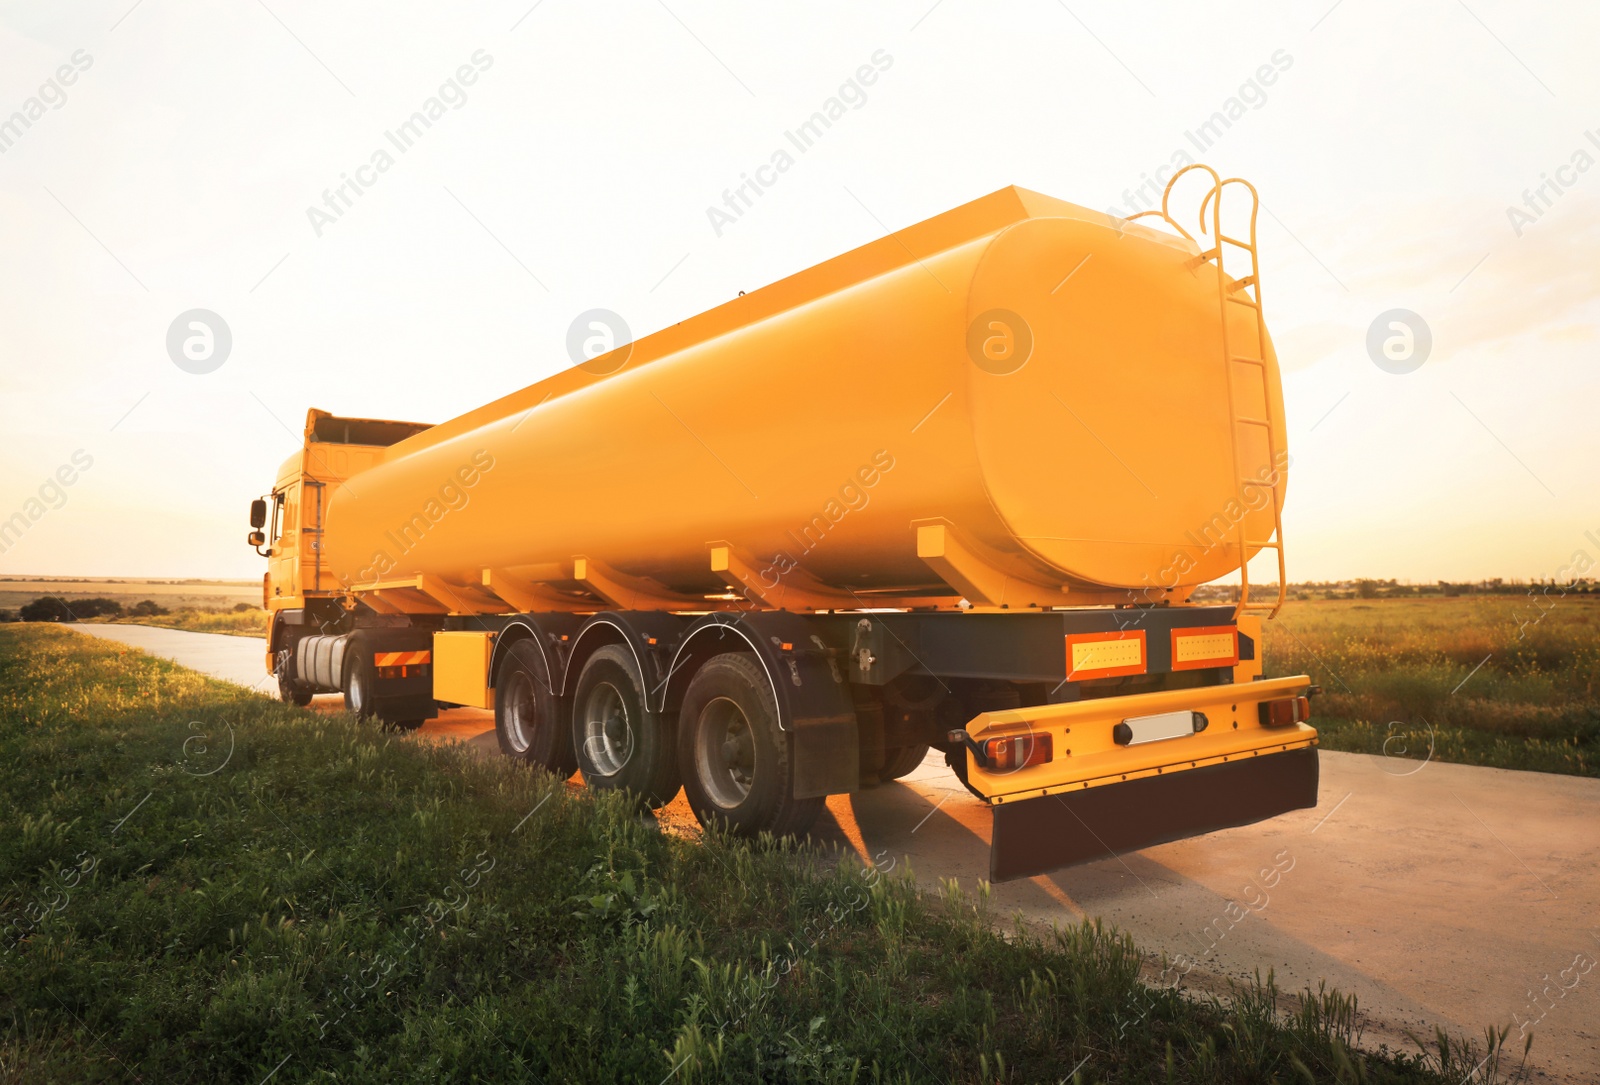 Photo of Modern yellow truck parked on country road